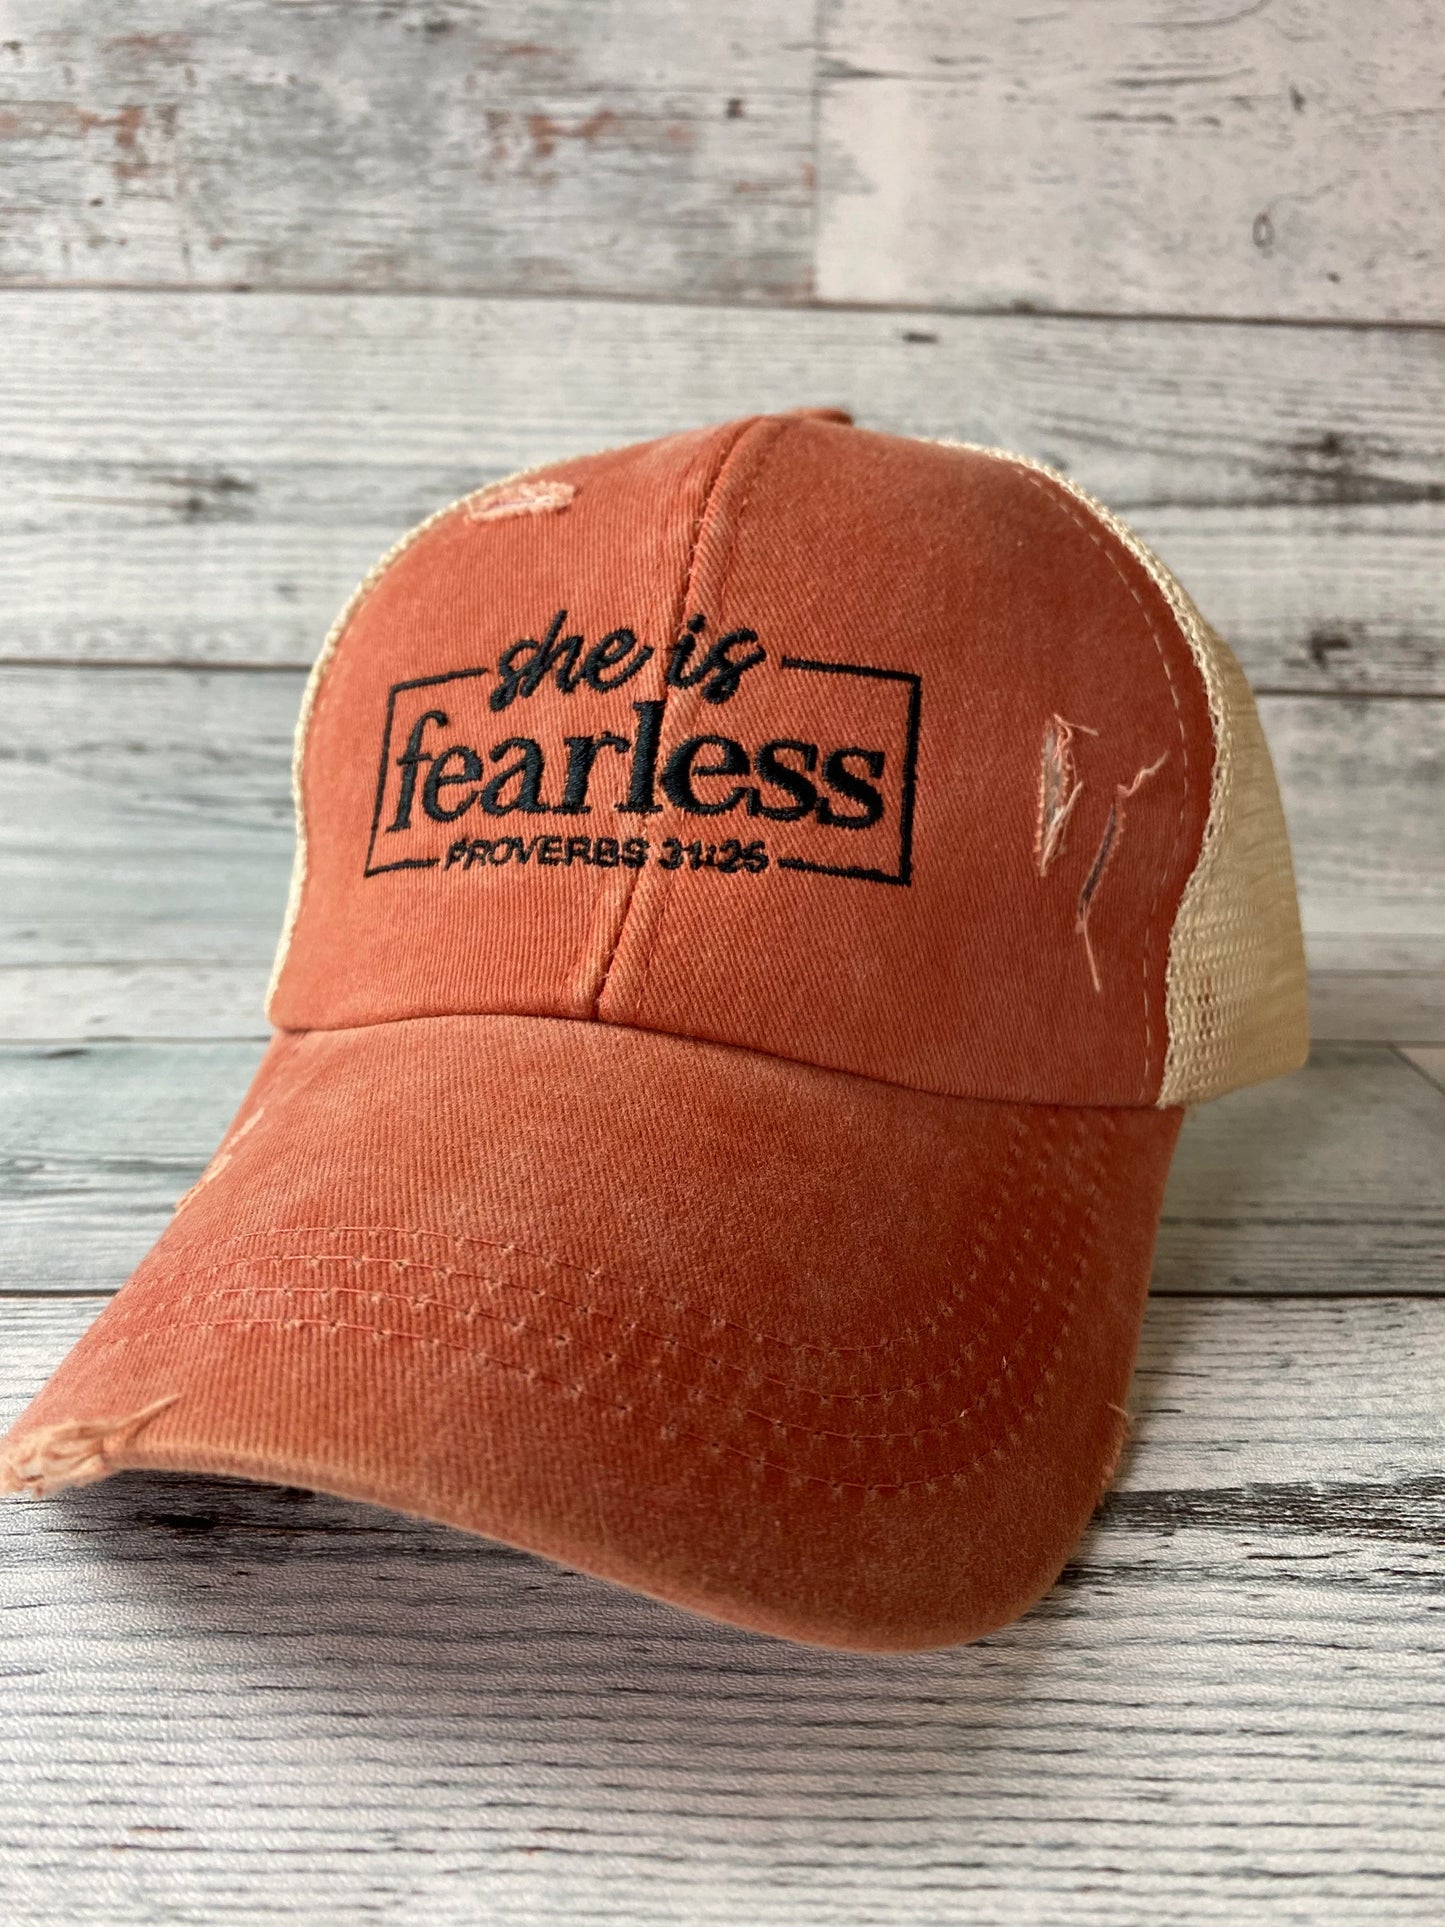 She is Fearless Proverbs 31:25 Embroidered Distressed Hat